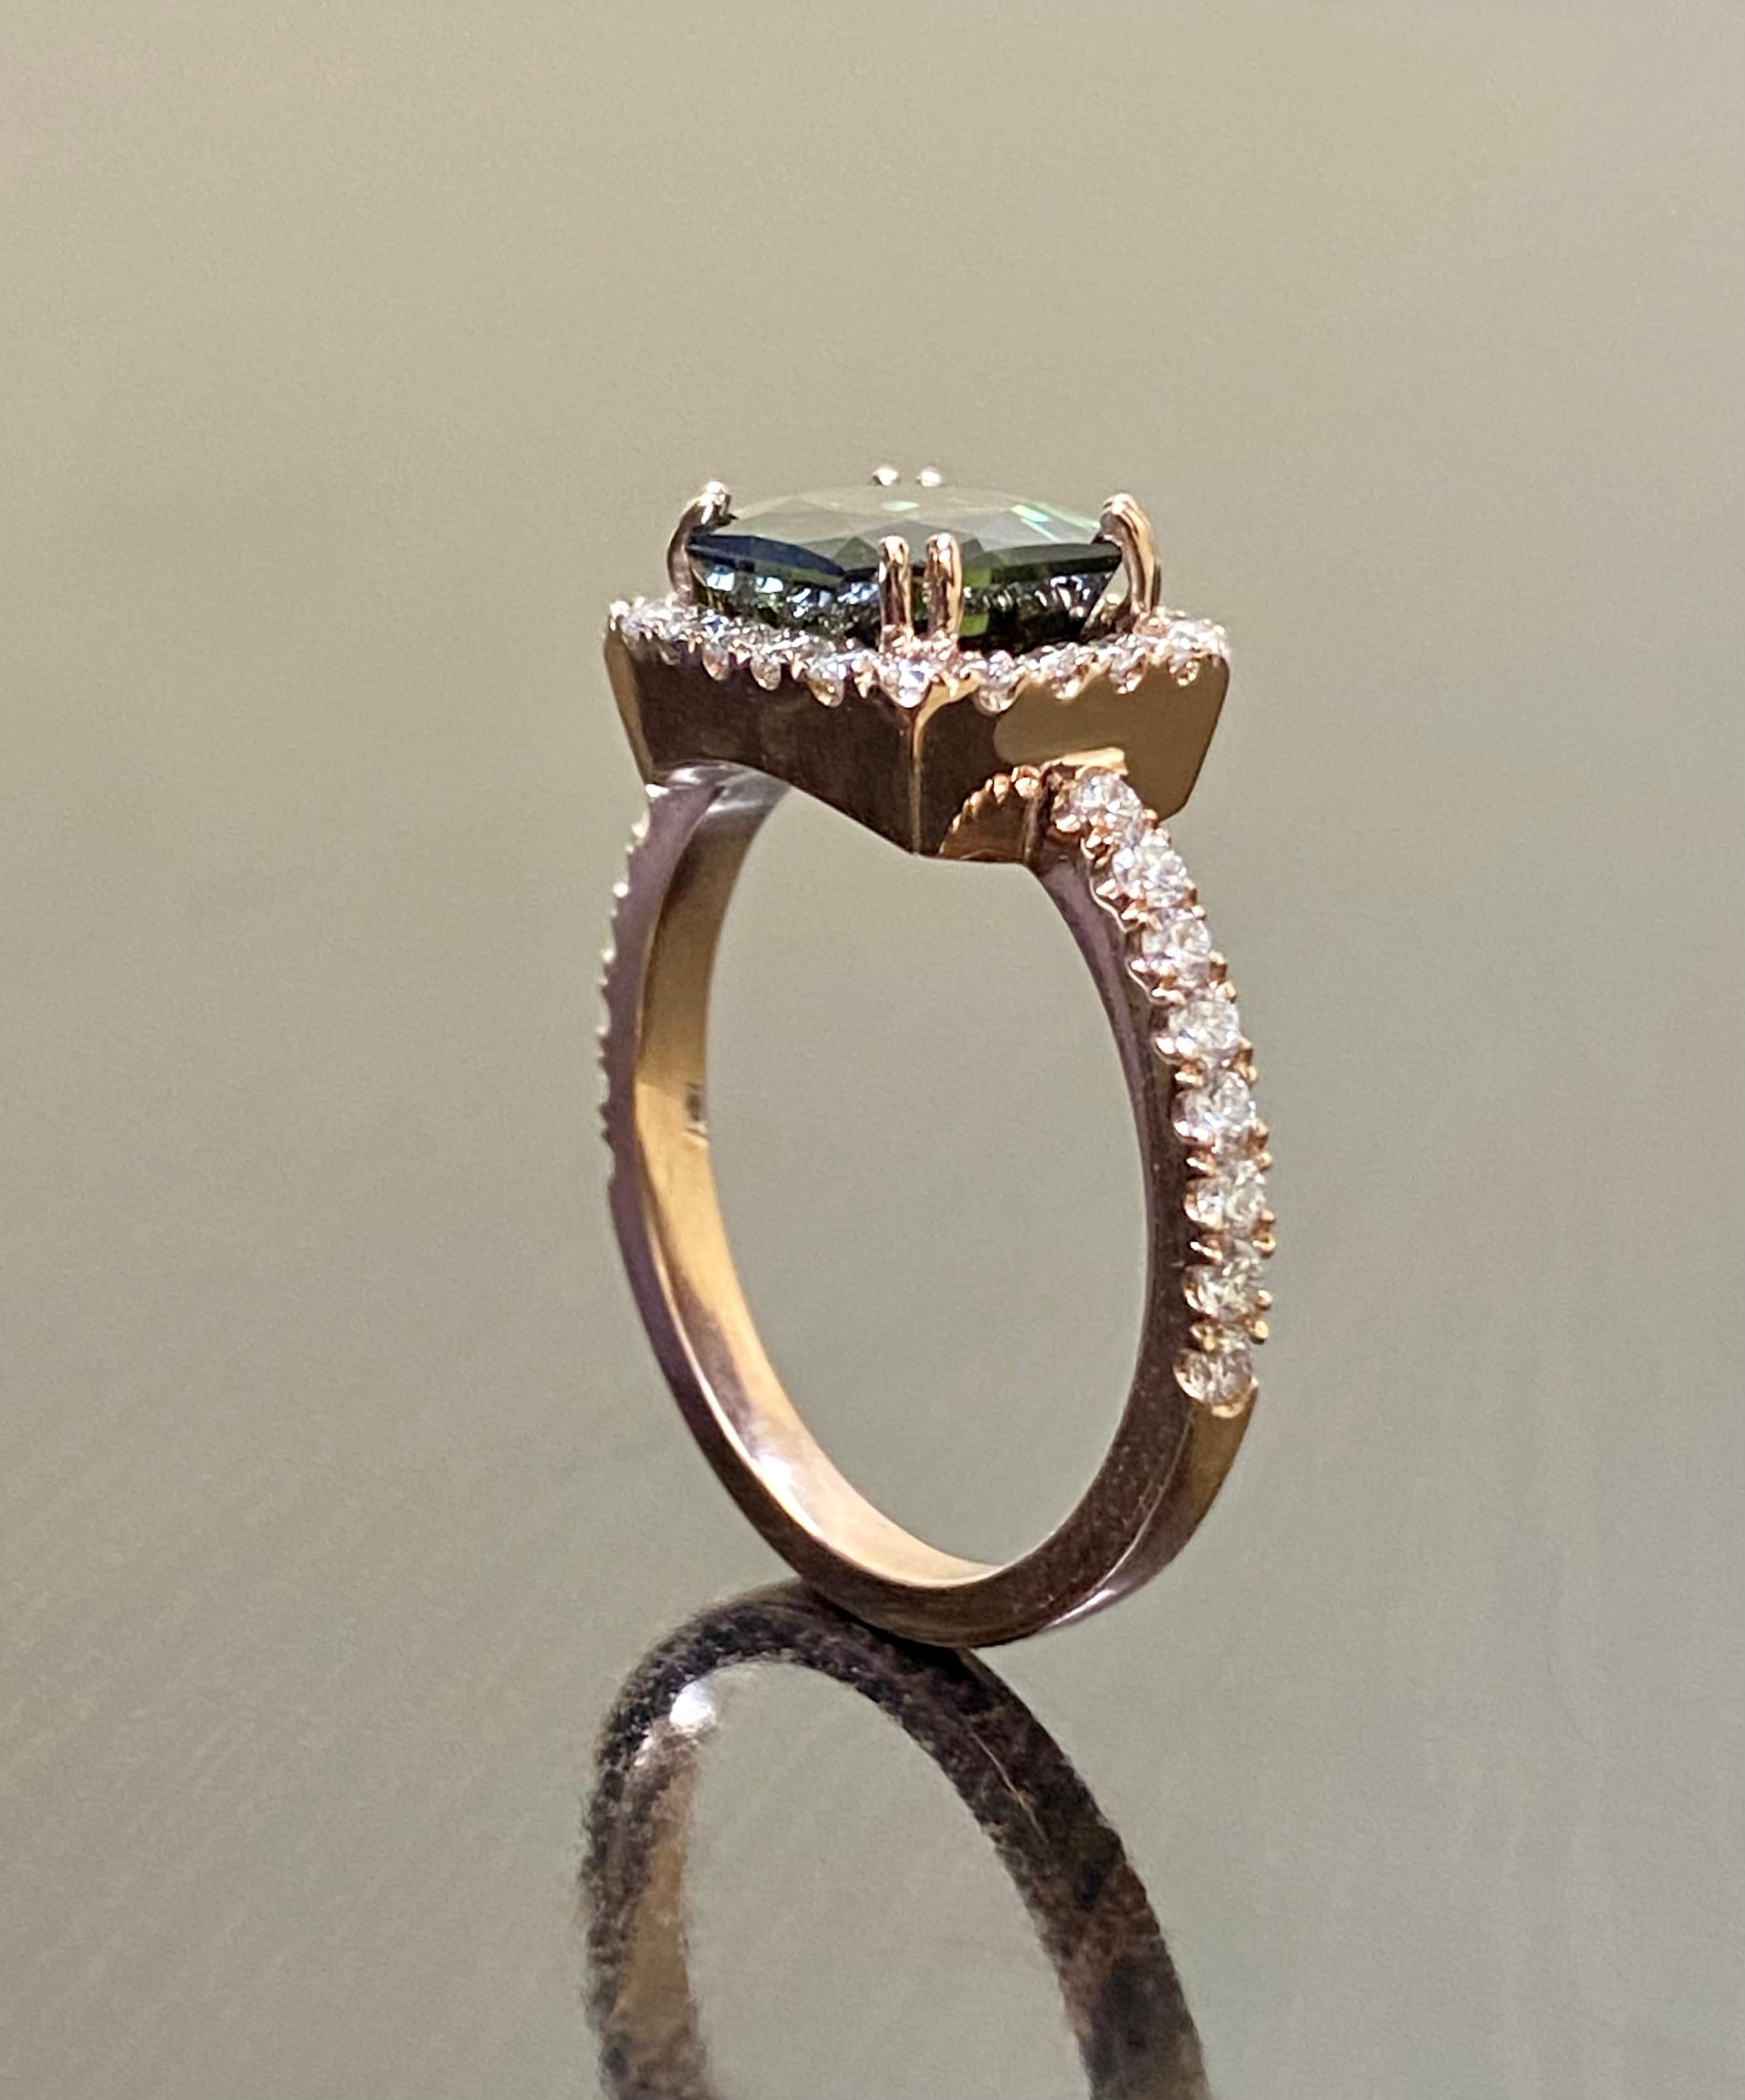 DeKara Designs Collection

Metal- 14K Rose Gold, .583.

Stones- 1 Radiant Cut No Heat Peacock Sapphire 3.66 Carats, 38 Round Diamonds G-H Color VS1-VS2 Clarity 0.52 Carats.  Sapphire is No Heat

Size- 7 1/2. FREE SIZING!!!!

Handmade 14K Rose Gold